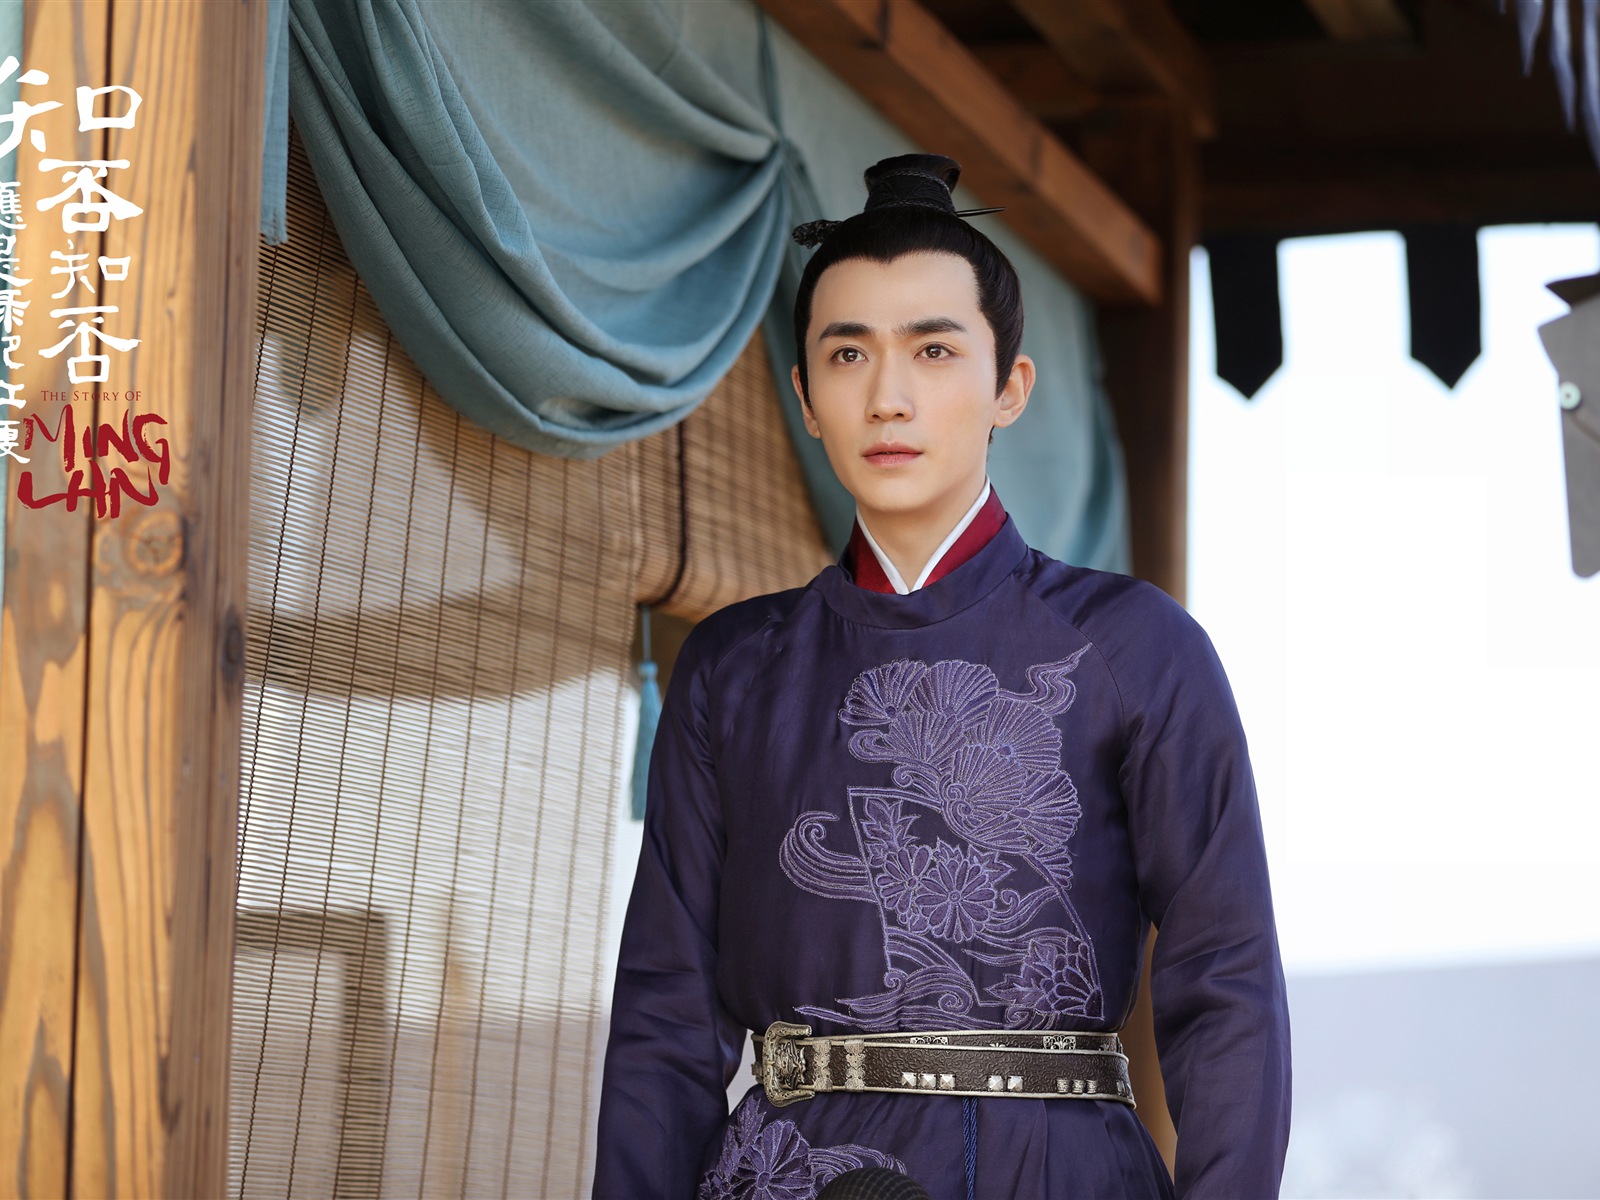 The Story Of MingLan, TV series HD wallpapers #24 - 1600x1200